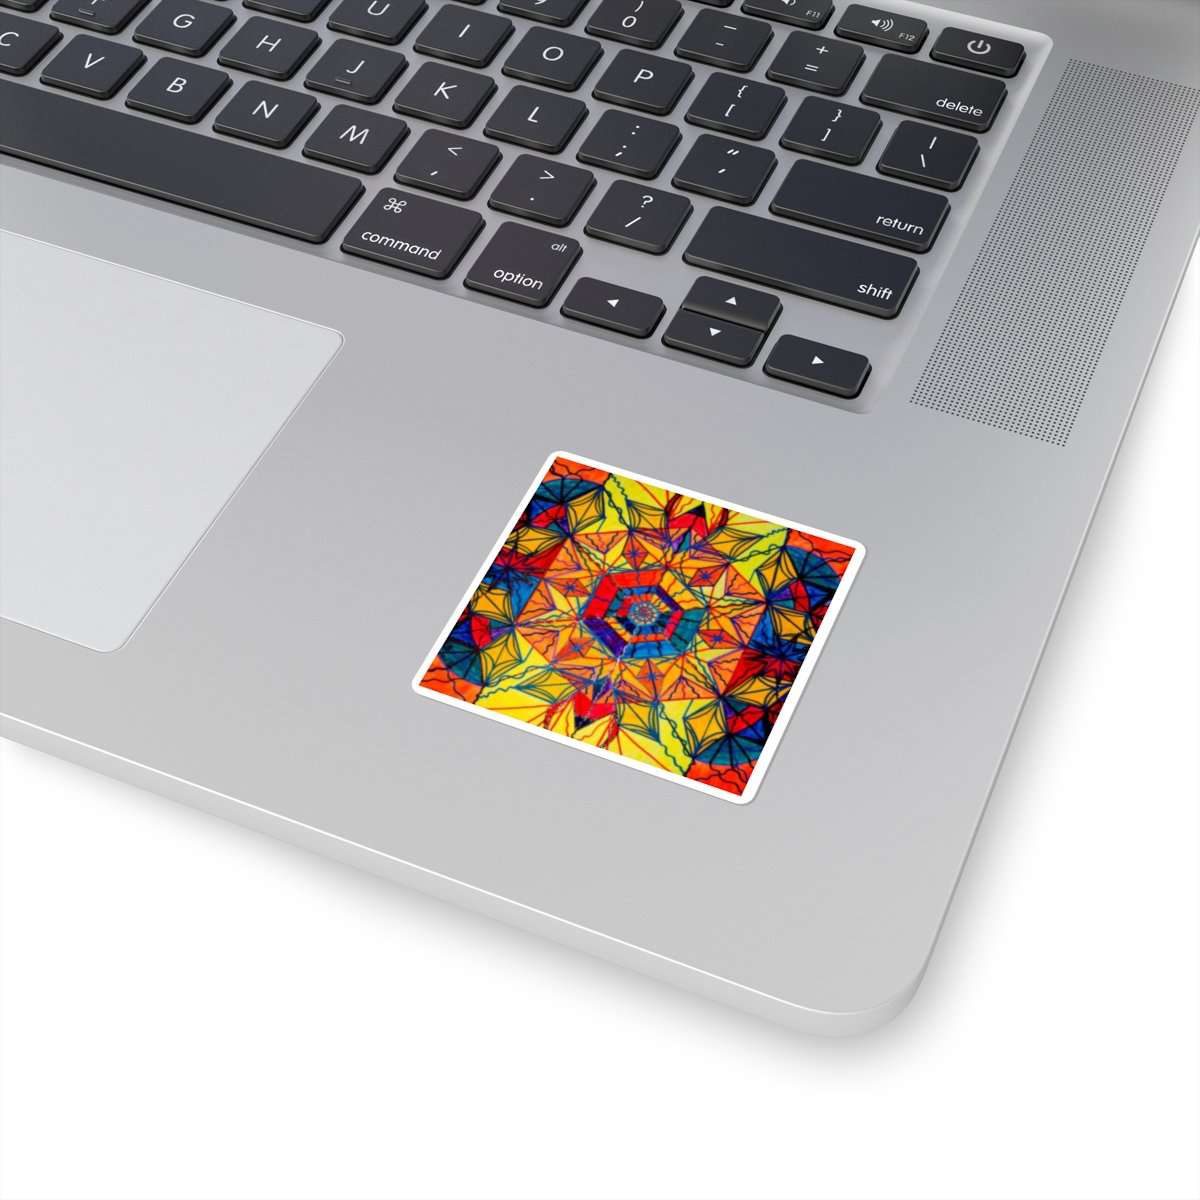 buy-cheap-wholesale-excitement-square-stickers-online-now_1.jpg